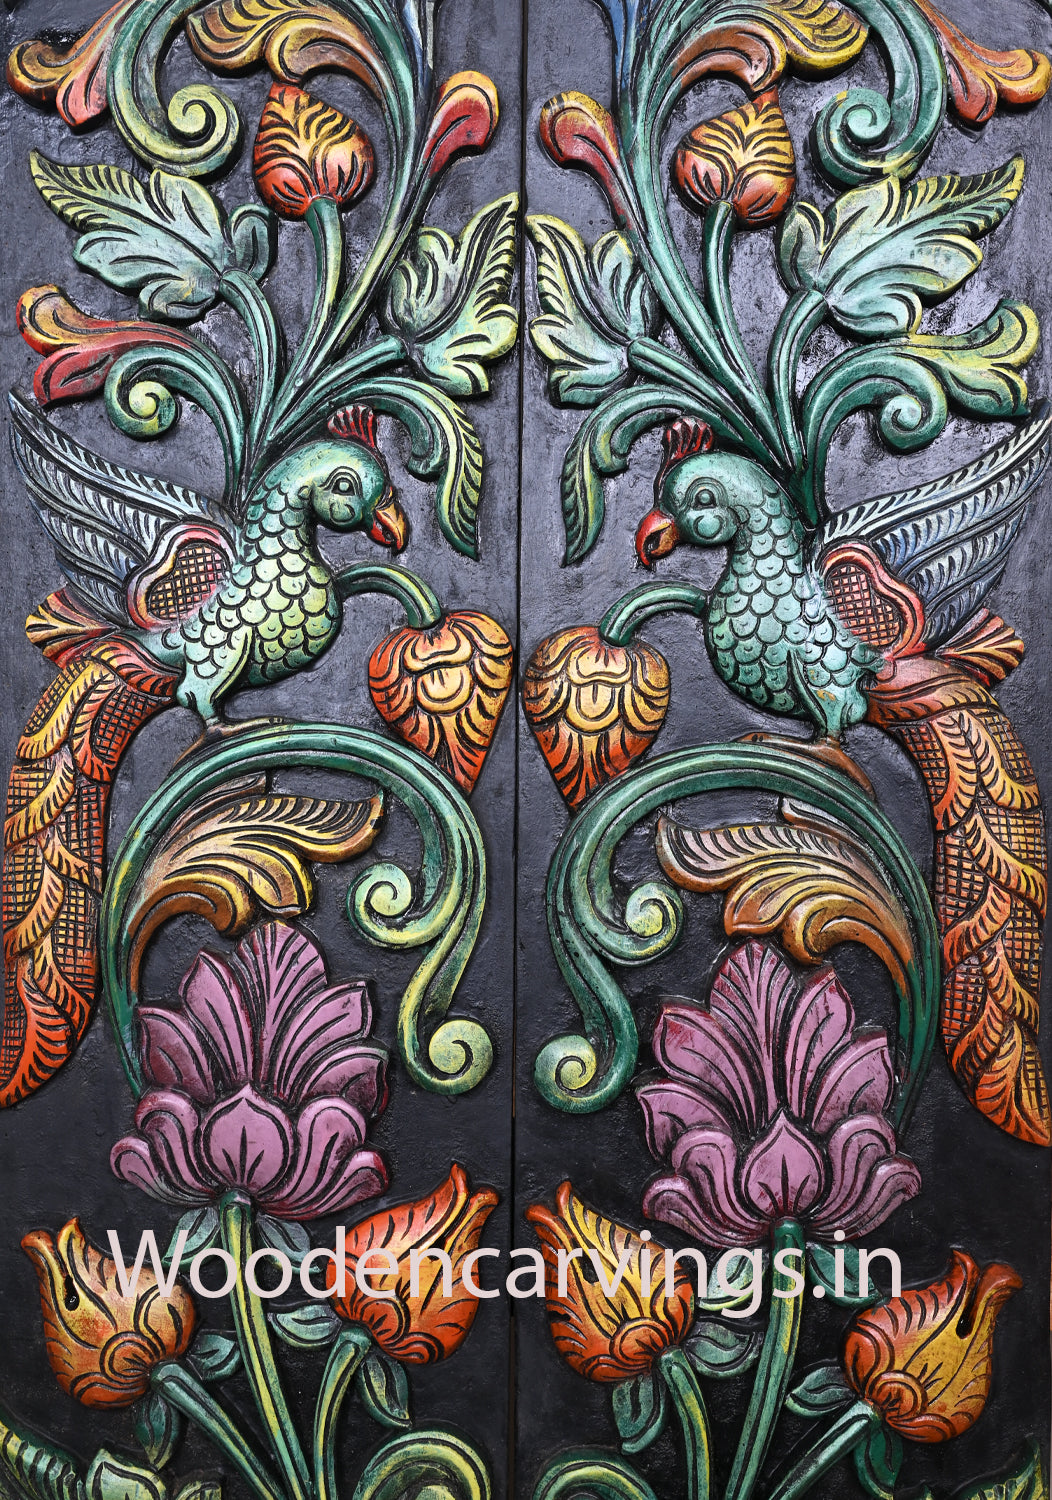 Vertical Entrance Decor Standing Peacocks on Floral Leafs Wooden Multicoloured Decorative Handmade Wall Panel 73"